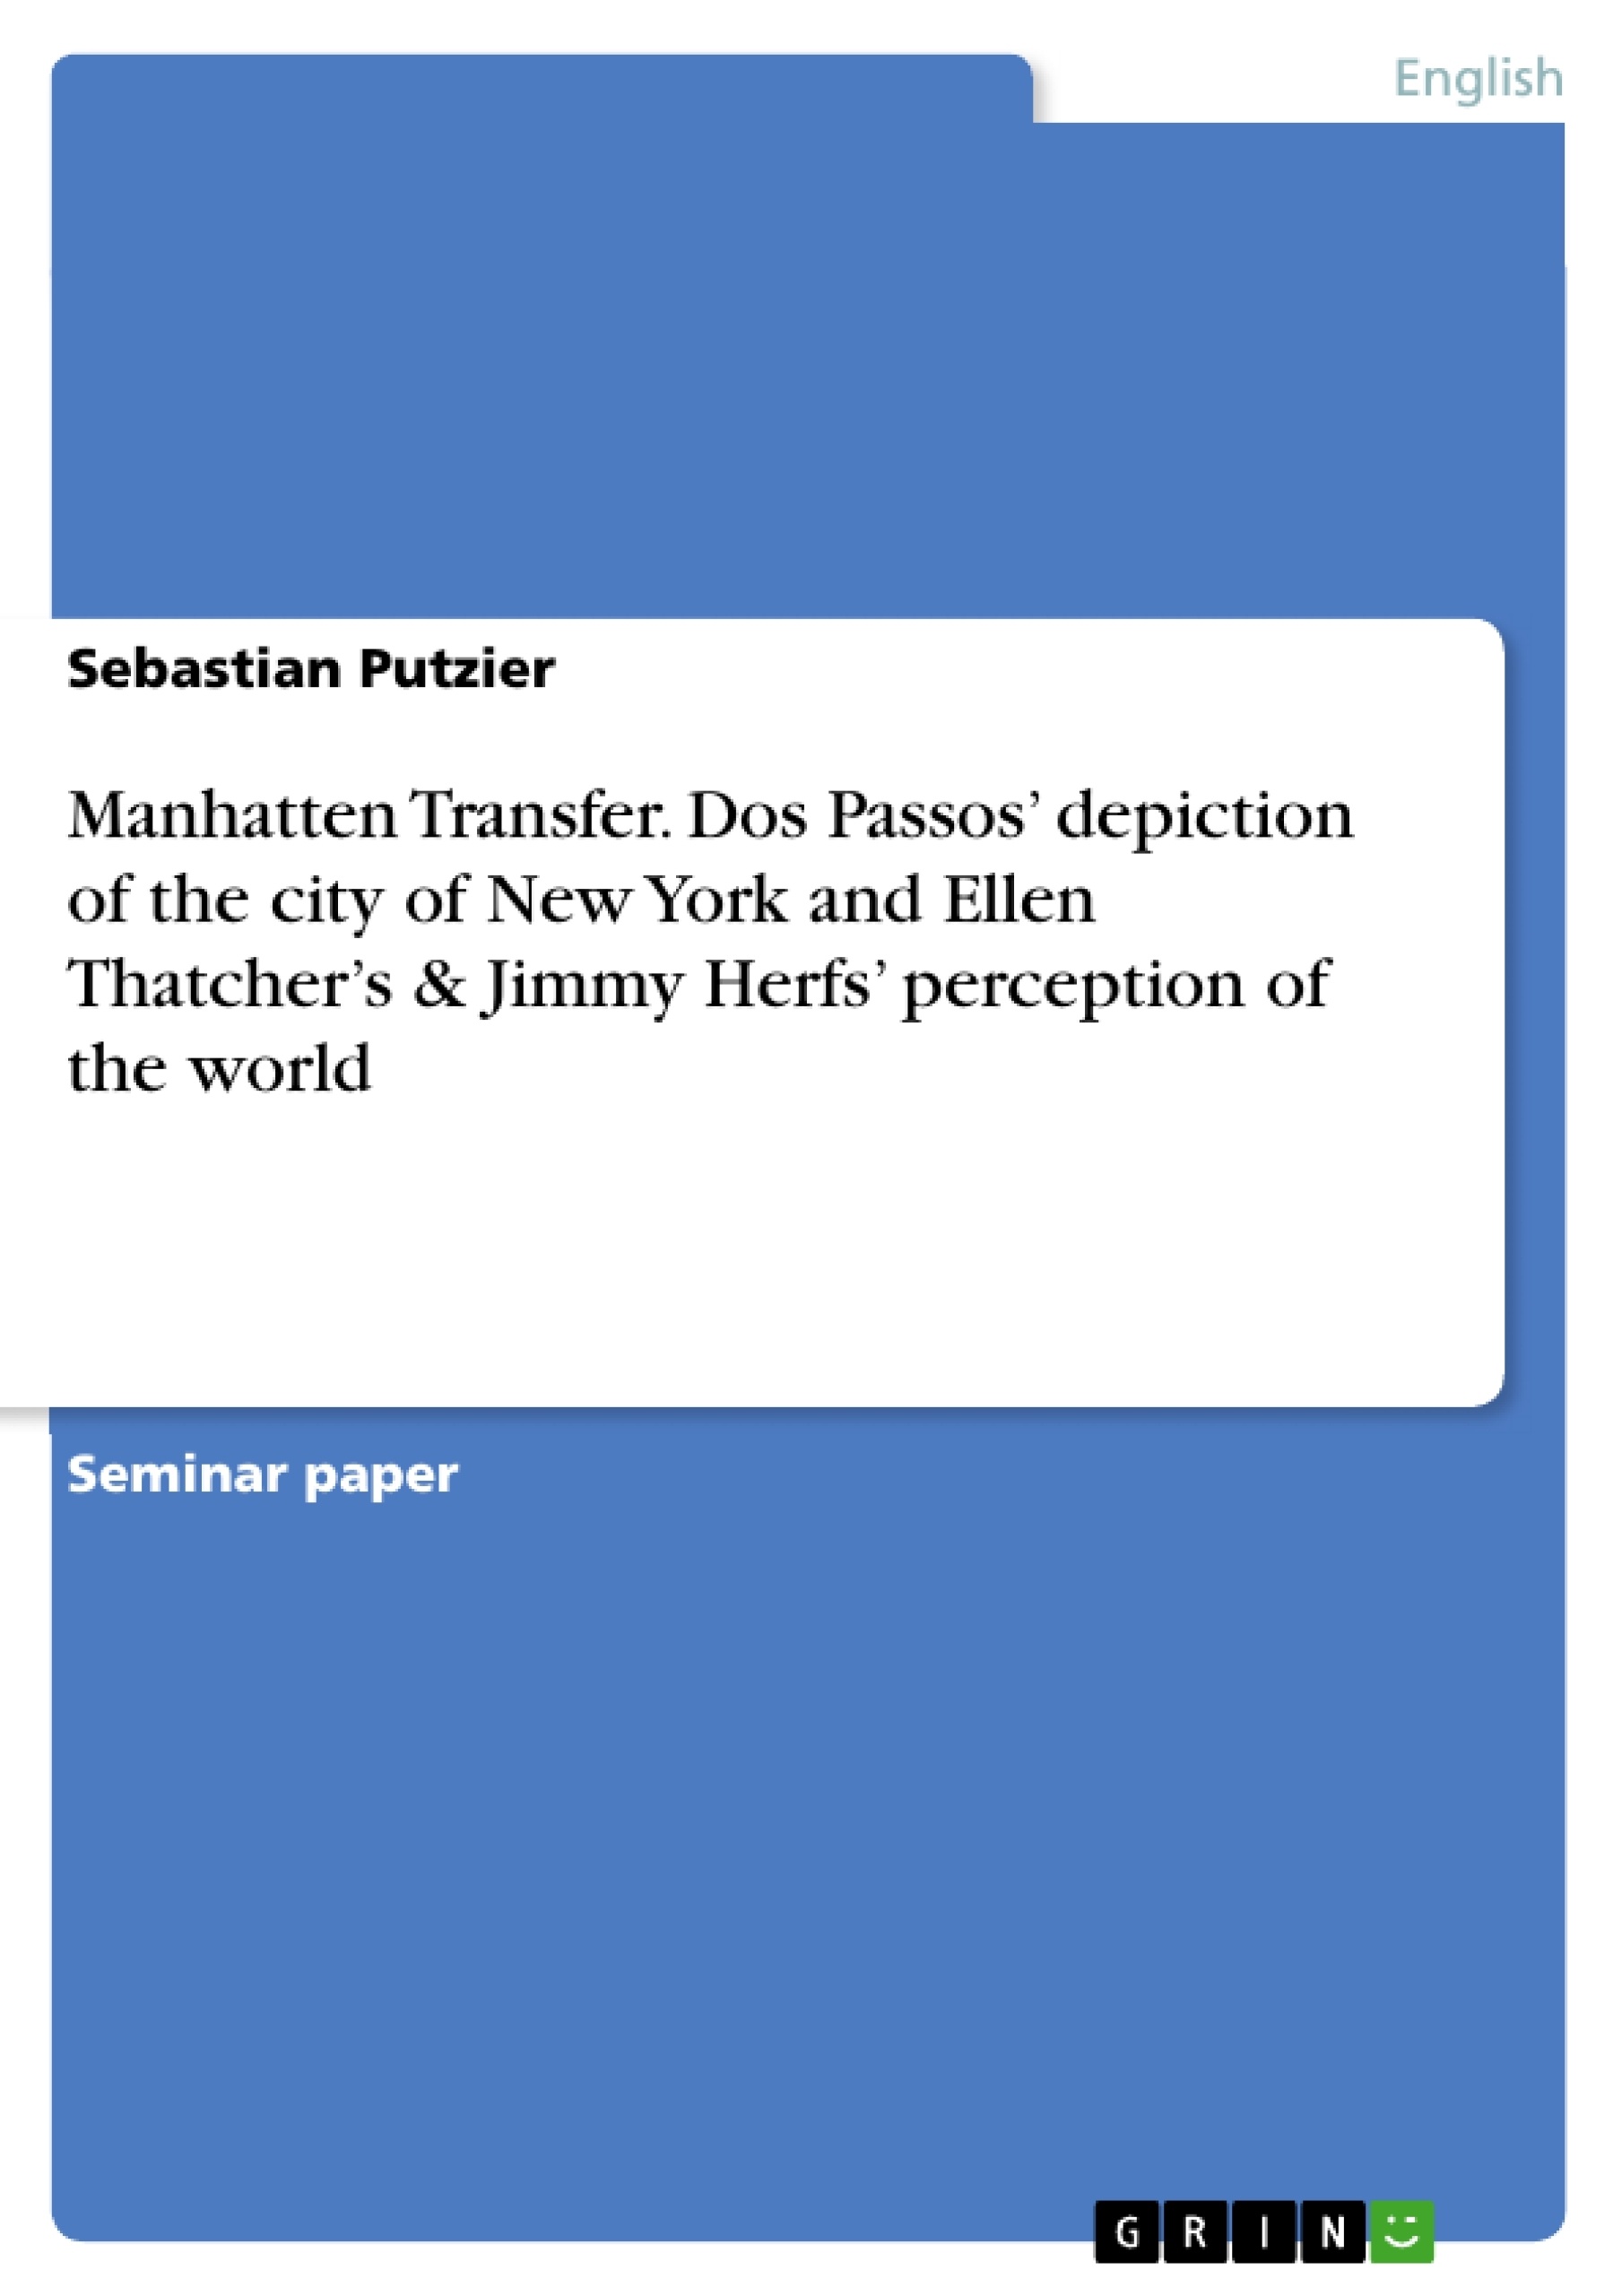 Titre: Manhatten Transfer. Dos Passos’ depiction of the city of New York and Ellen Thatcher’s & Jimmy Herfs’ perception of the world